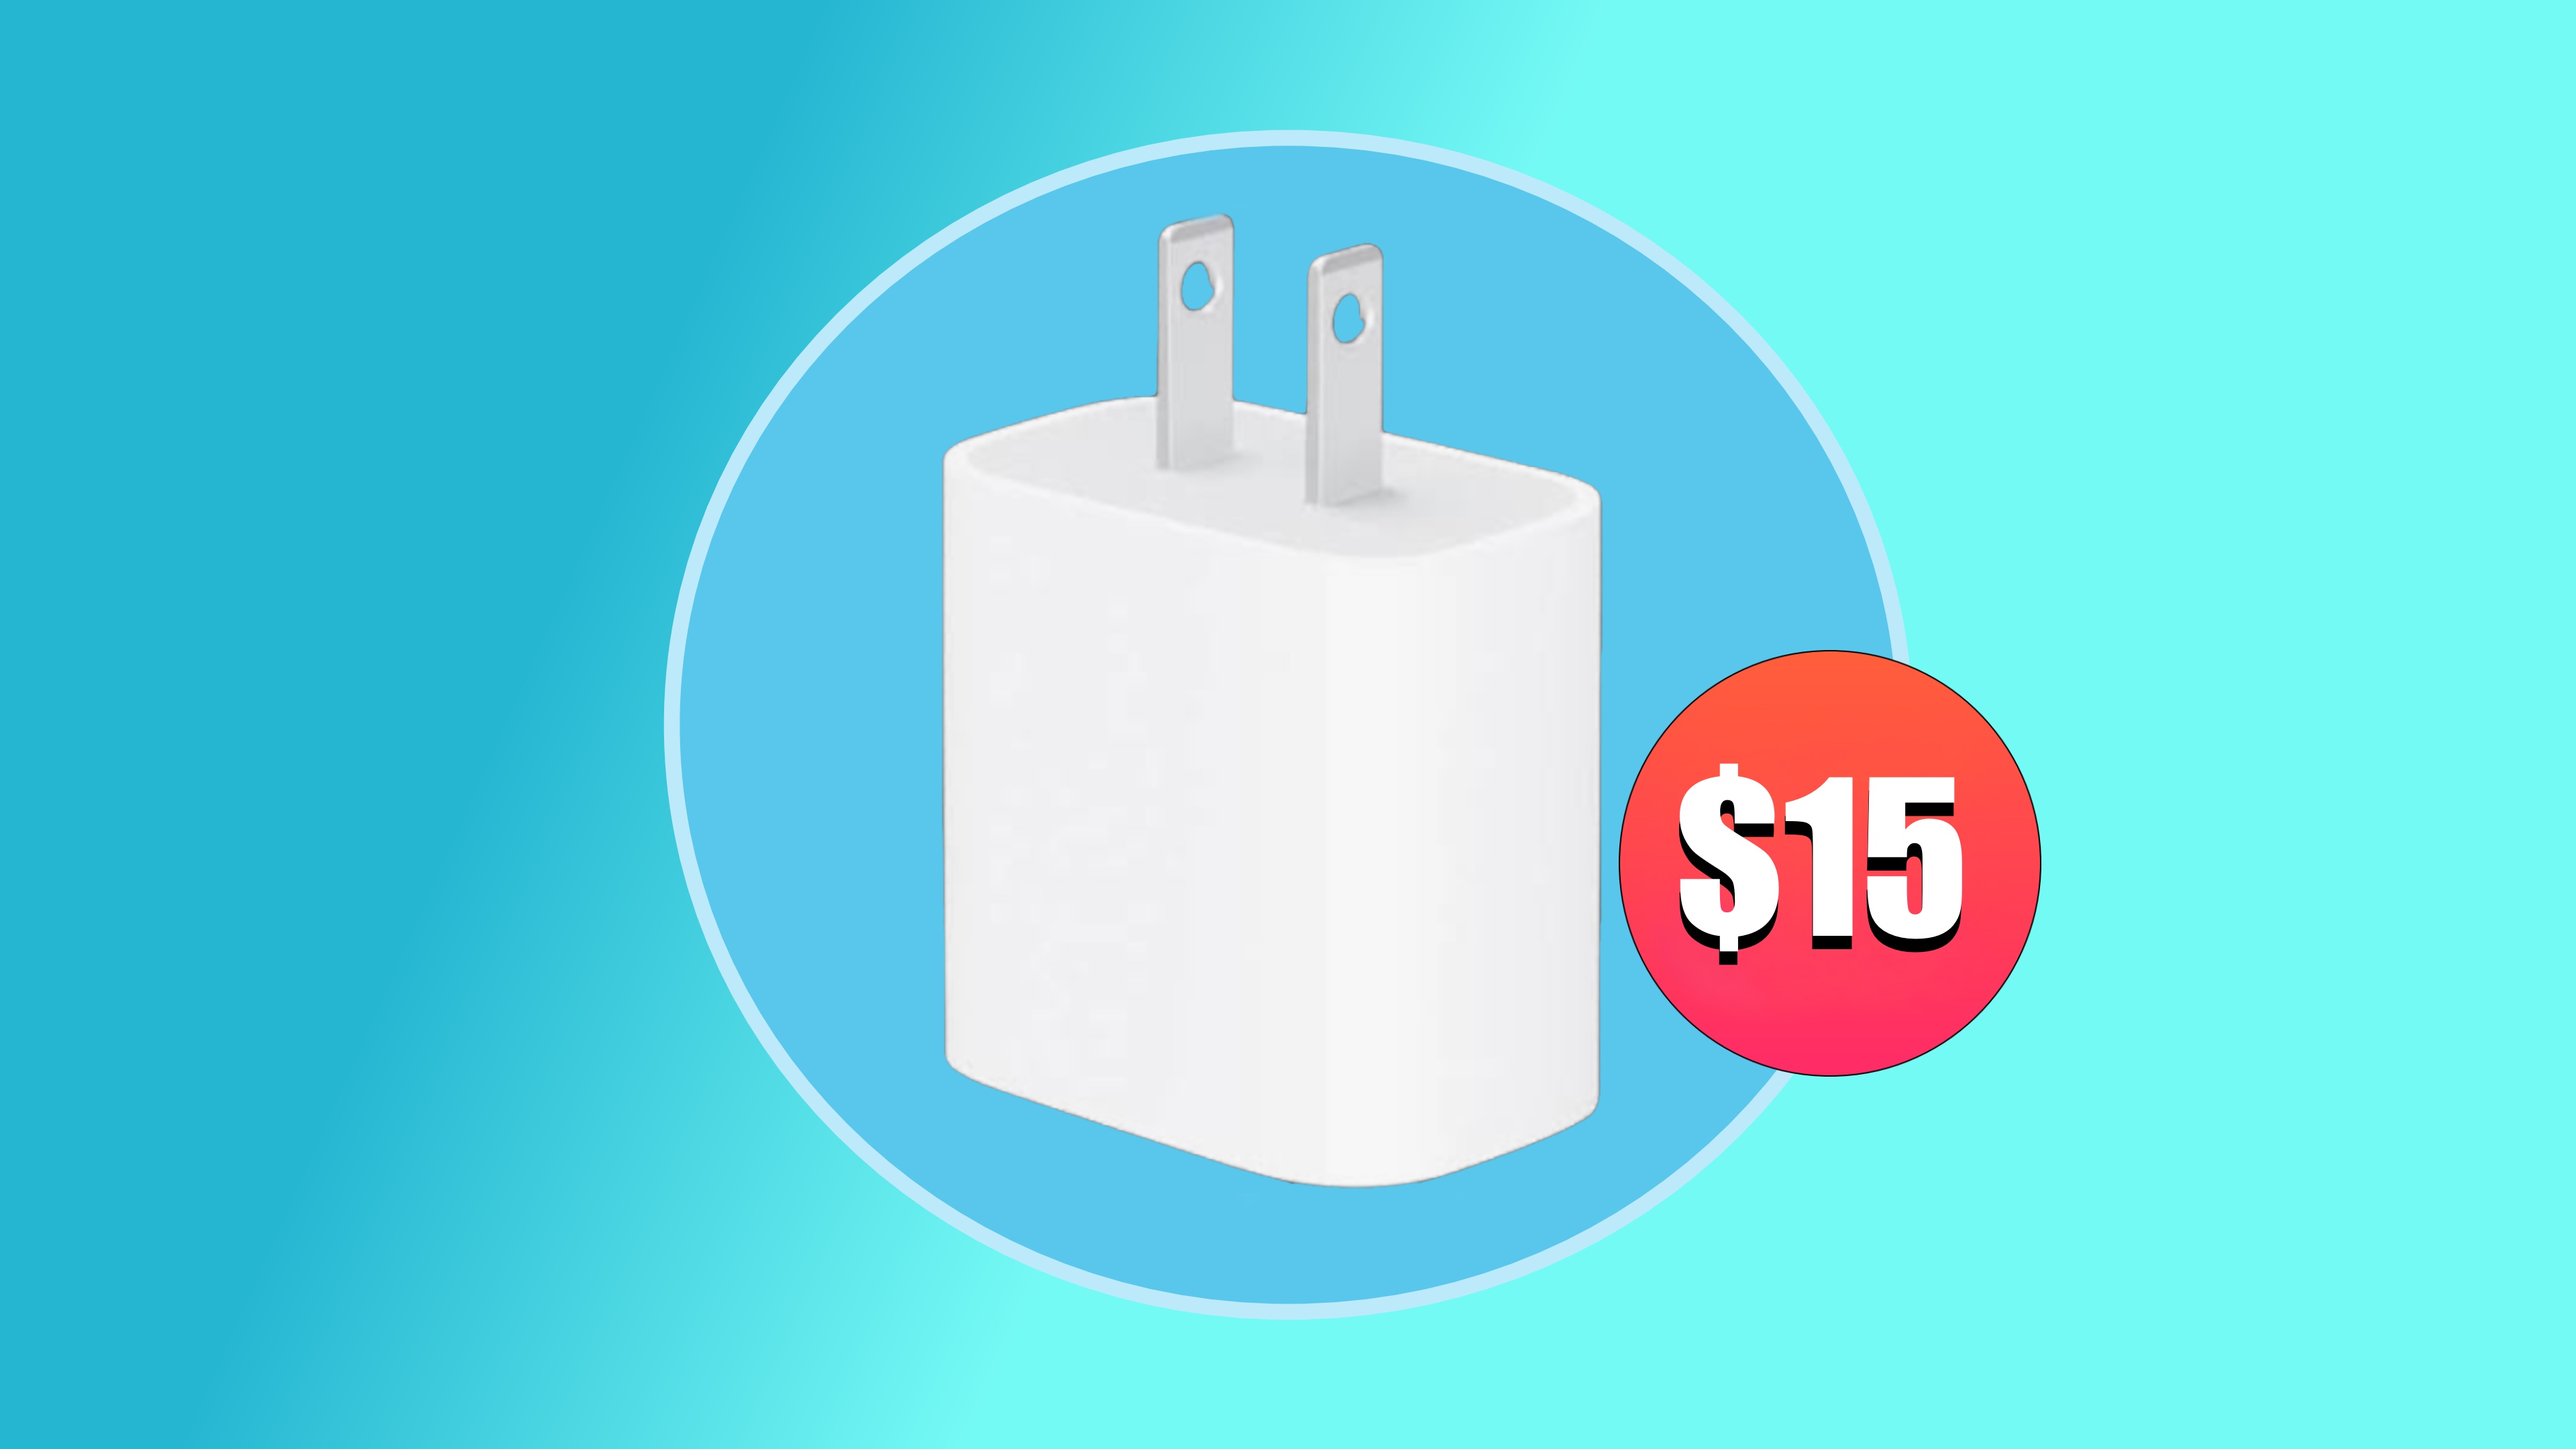 Get Apple’s 20W USB-C Power Adapter for just $15